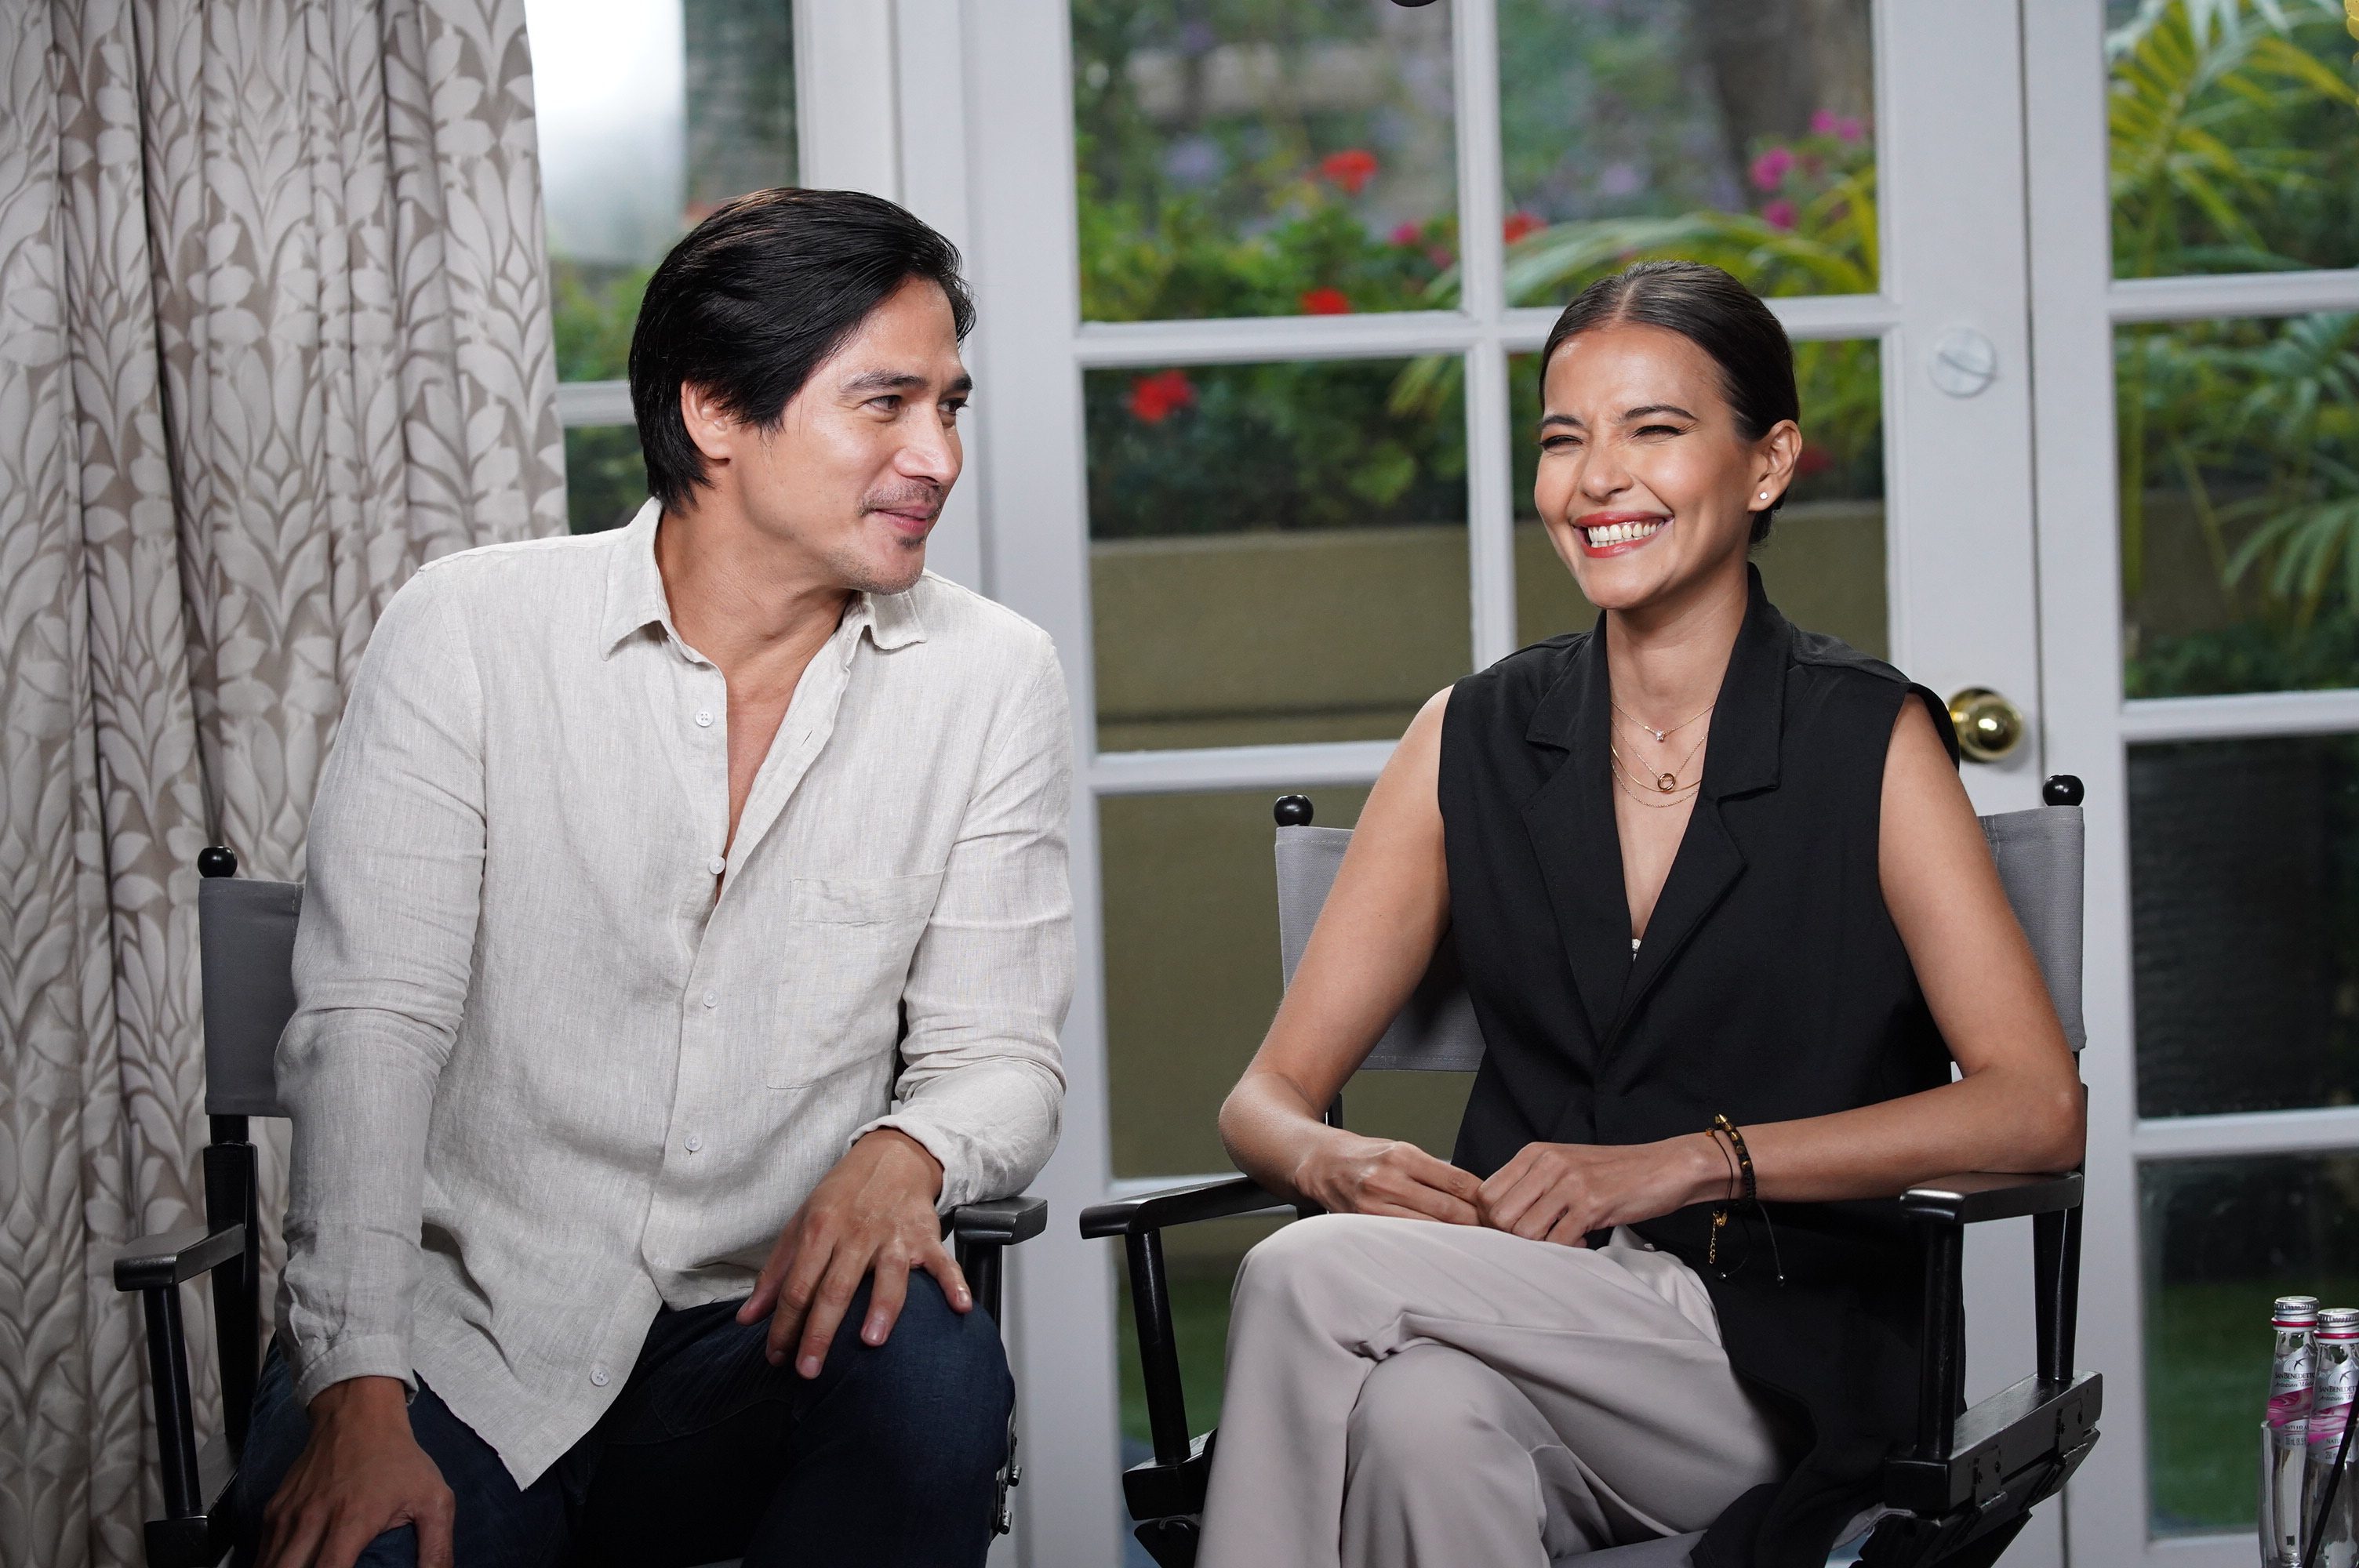 Alessandra de Rossi’s ‘biggest mistake’ and what inspired ‘My Amanda’